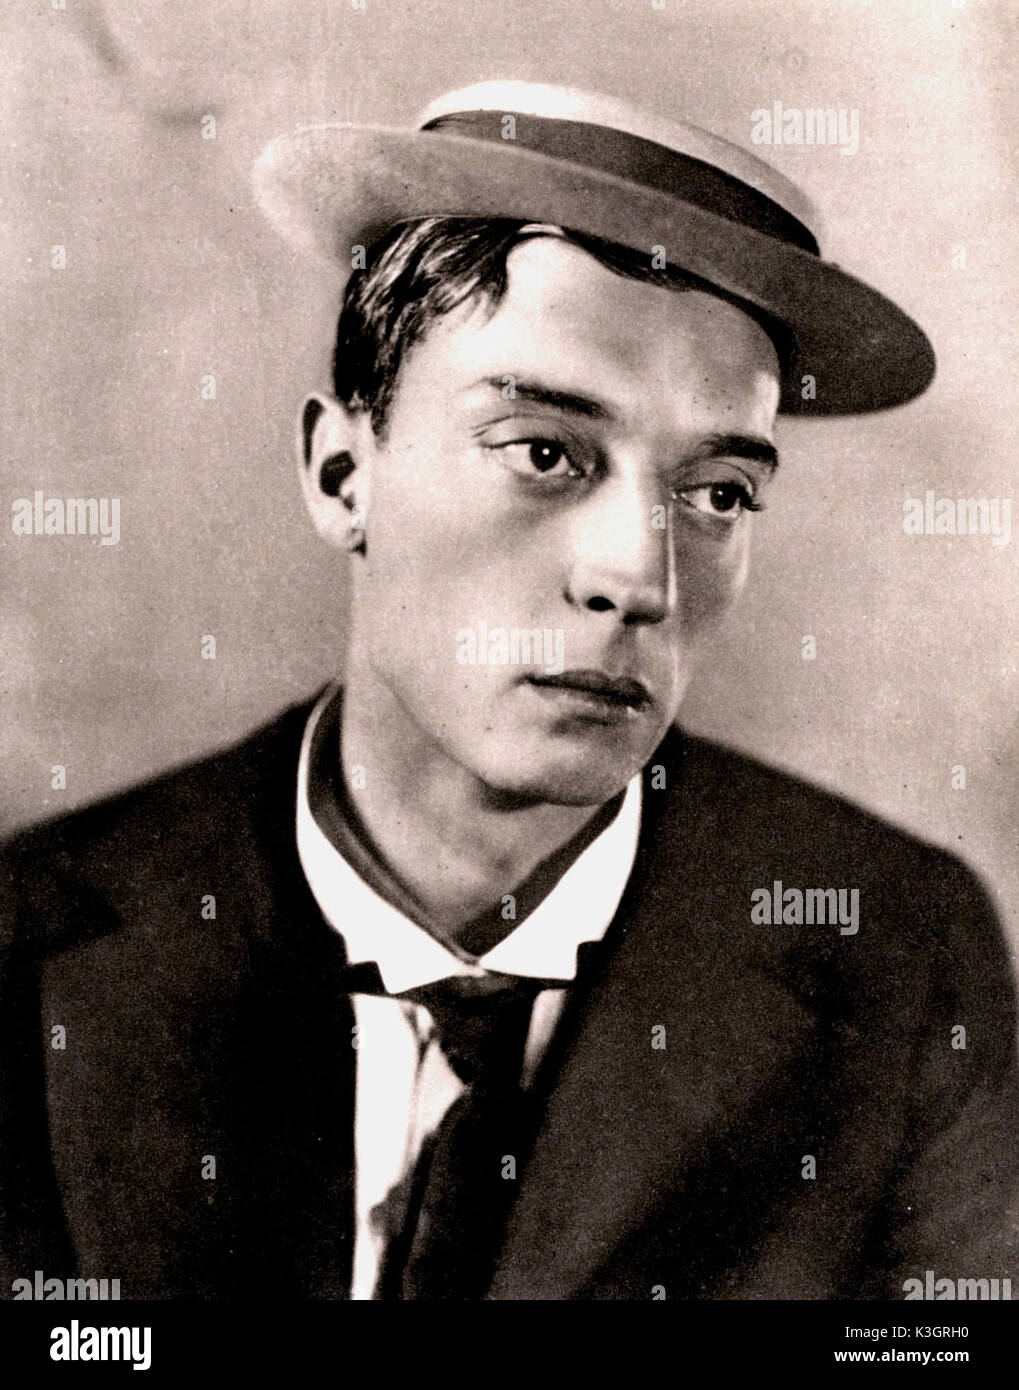 Buster Keaton, the Great Stone Face - CBS News